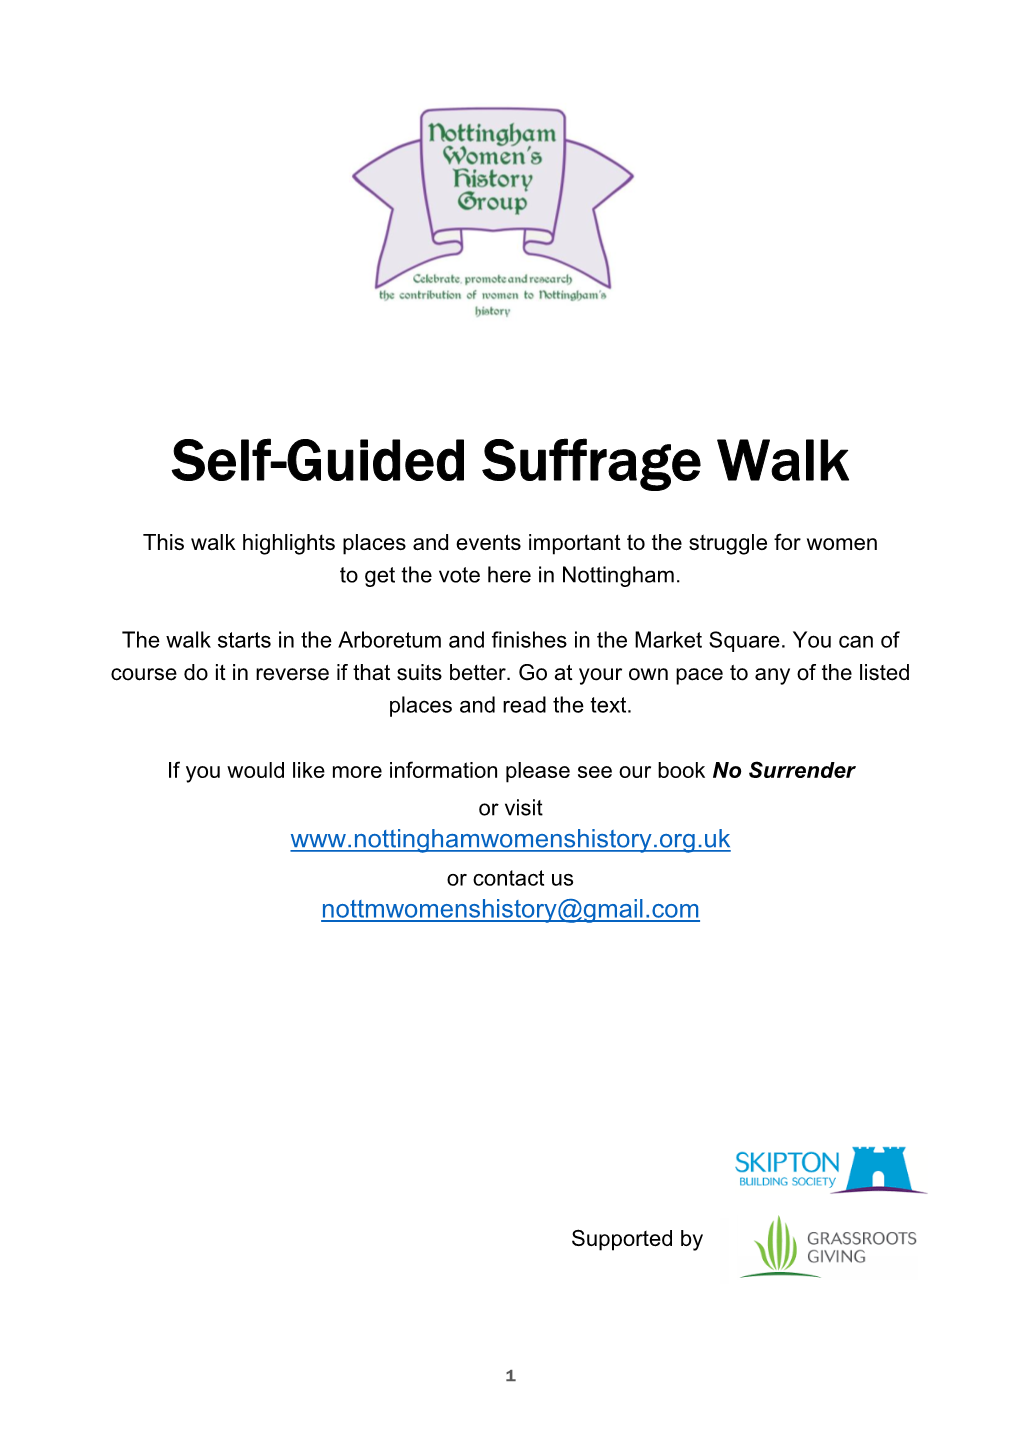 Suffrage Self-Guided Walk